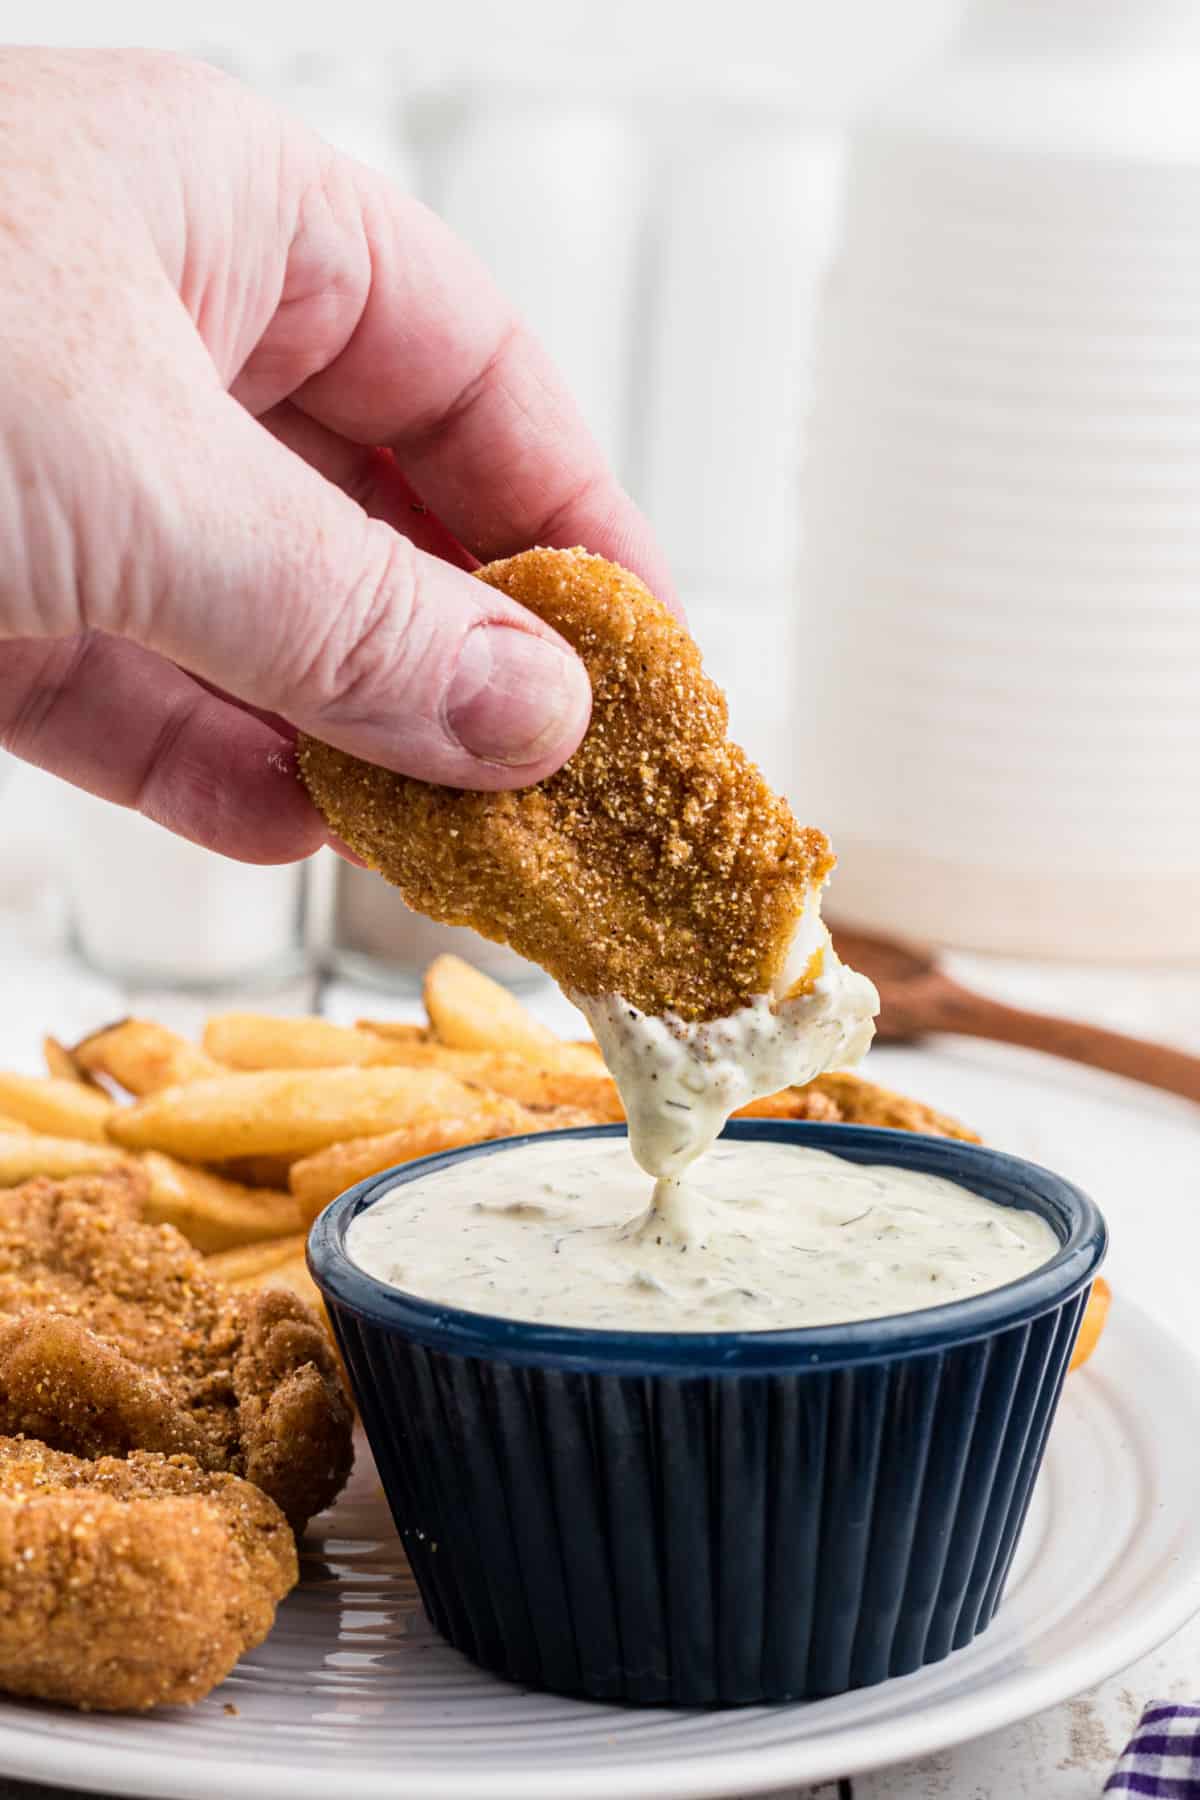 A piece of fish being dipped into some southern tartar sauce.